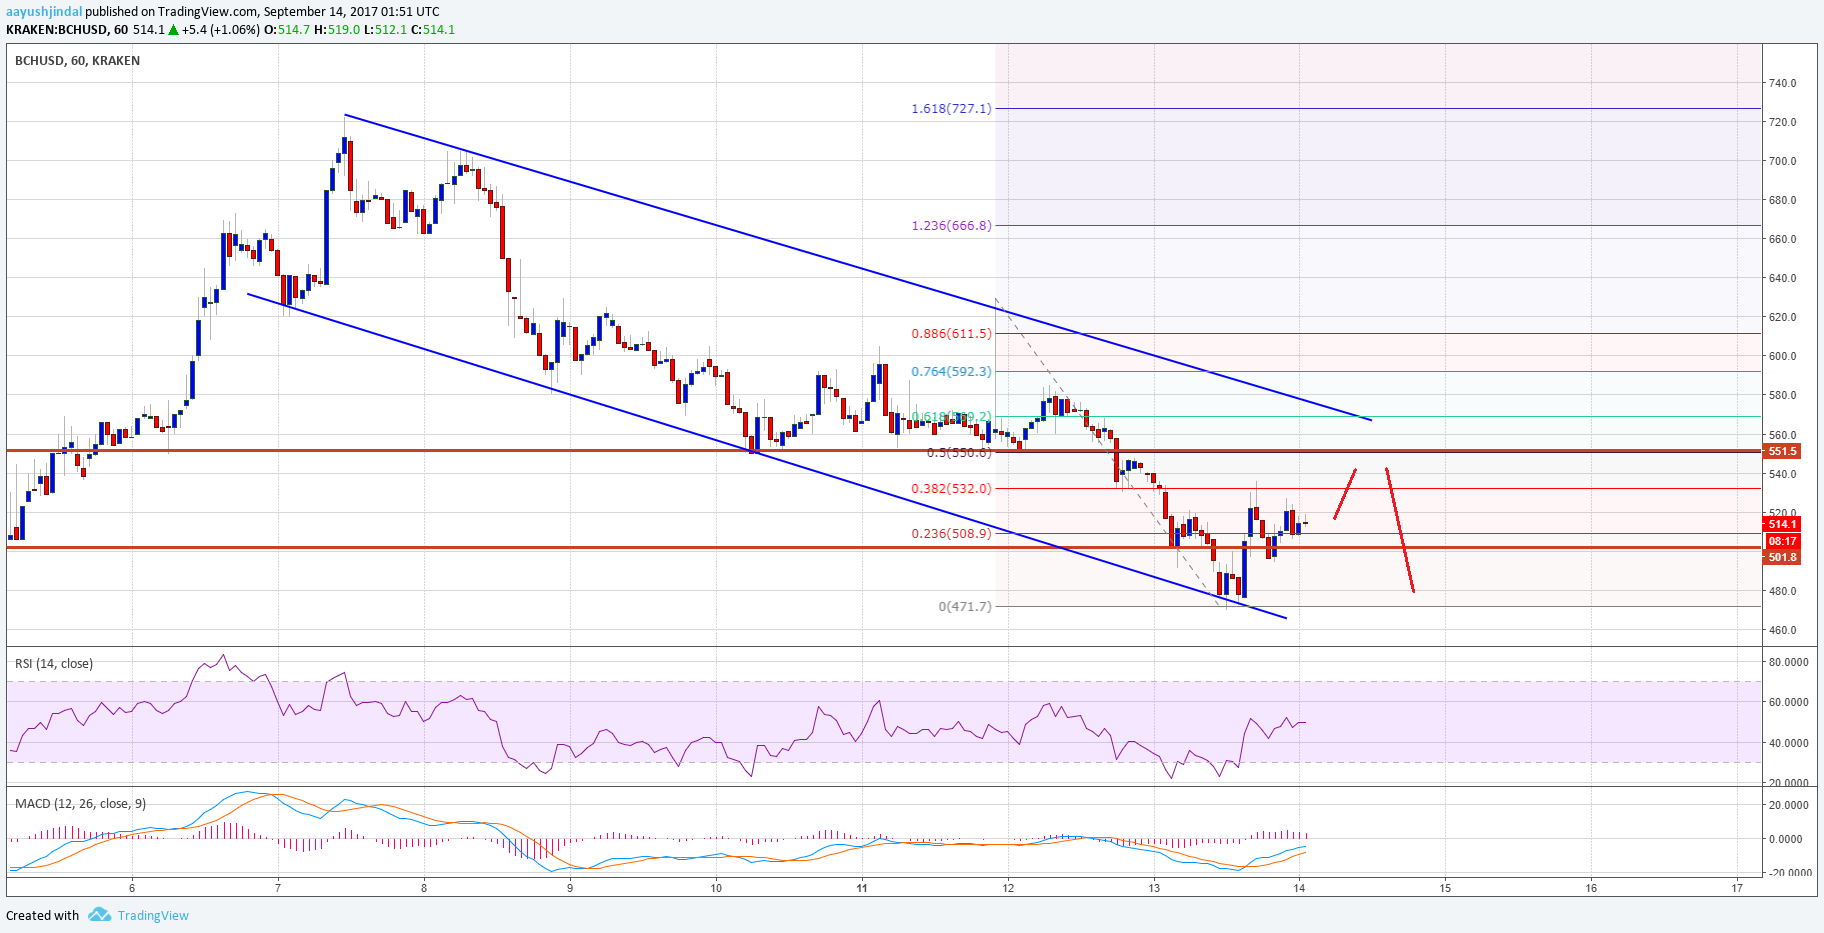 Bitcoin Cash Technical Analysis – BCH/USD Still In Downtrend